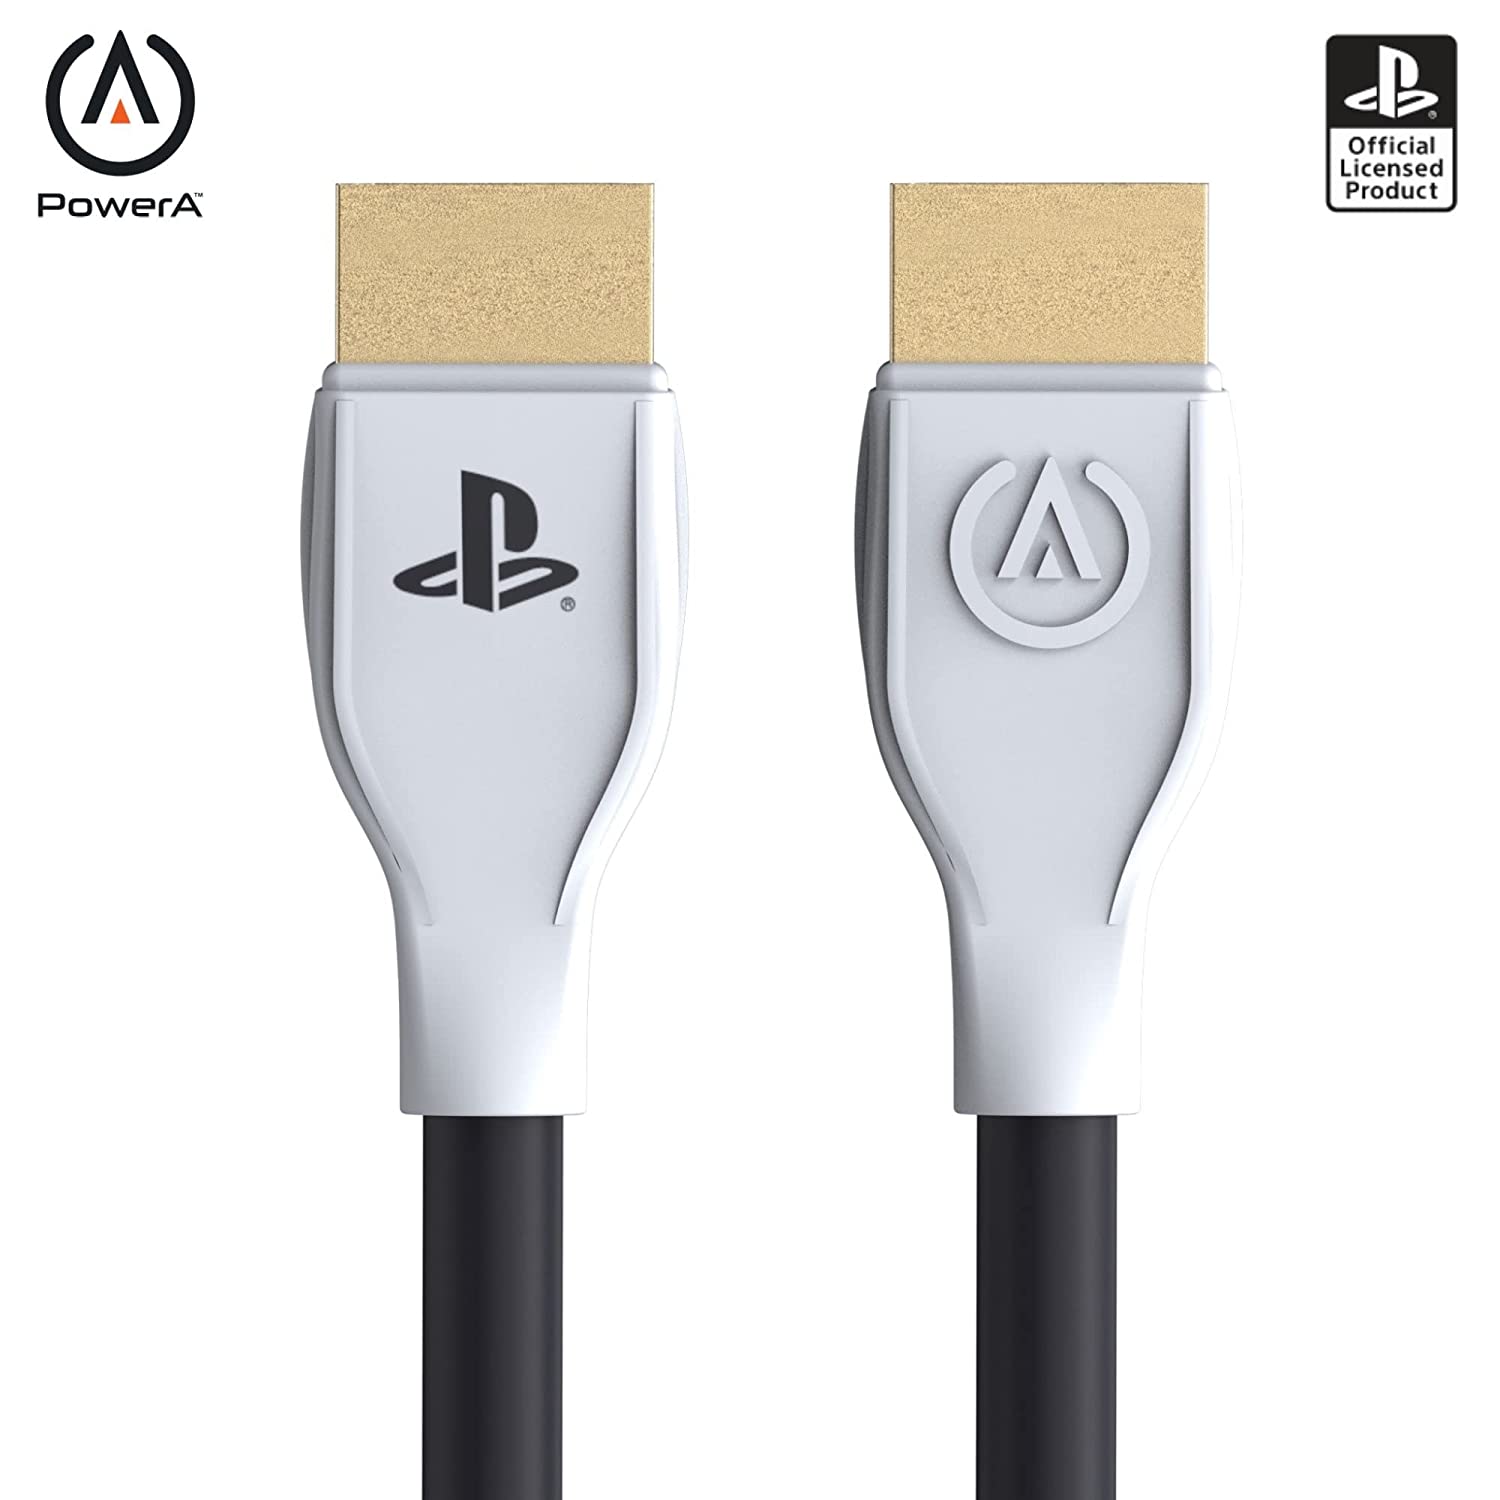 PowerA Ultra High Speed HDMI Cable for Playstation 5, Cable, HDMI 2.1, PS5, Officially Licensed